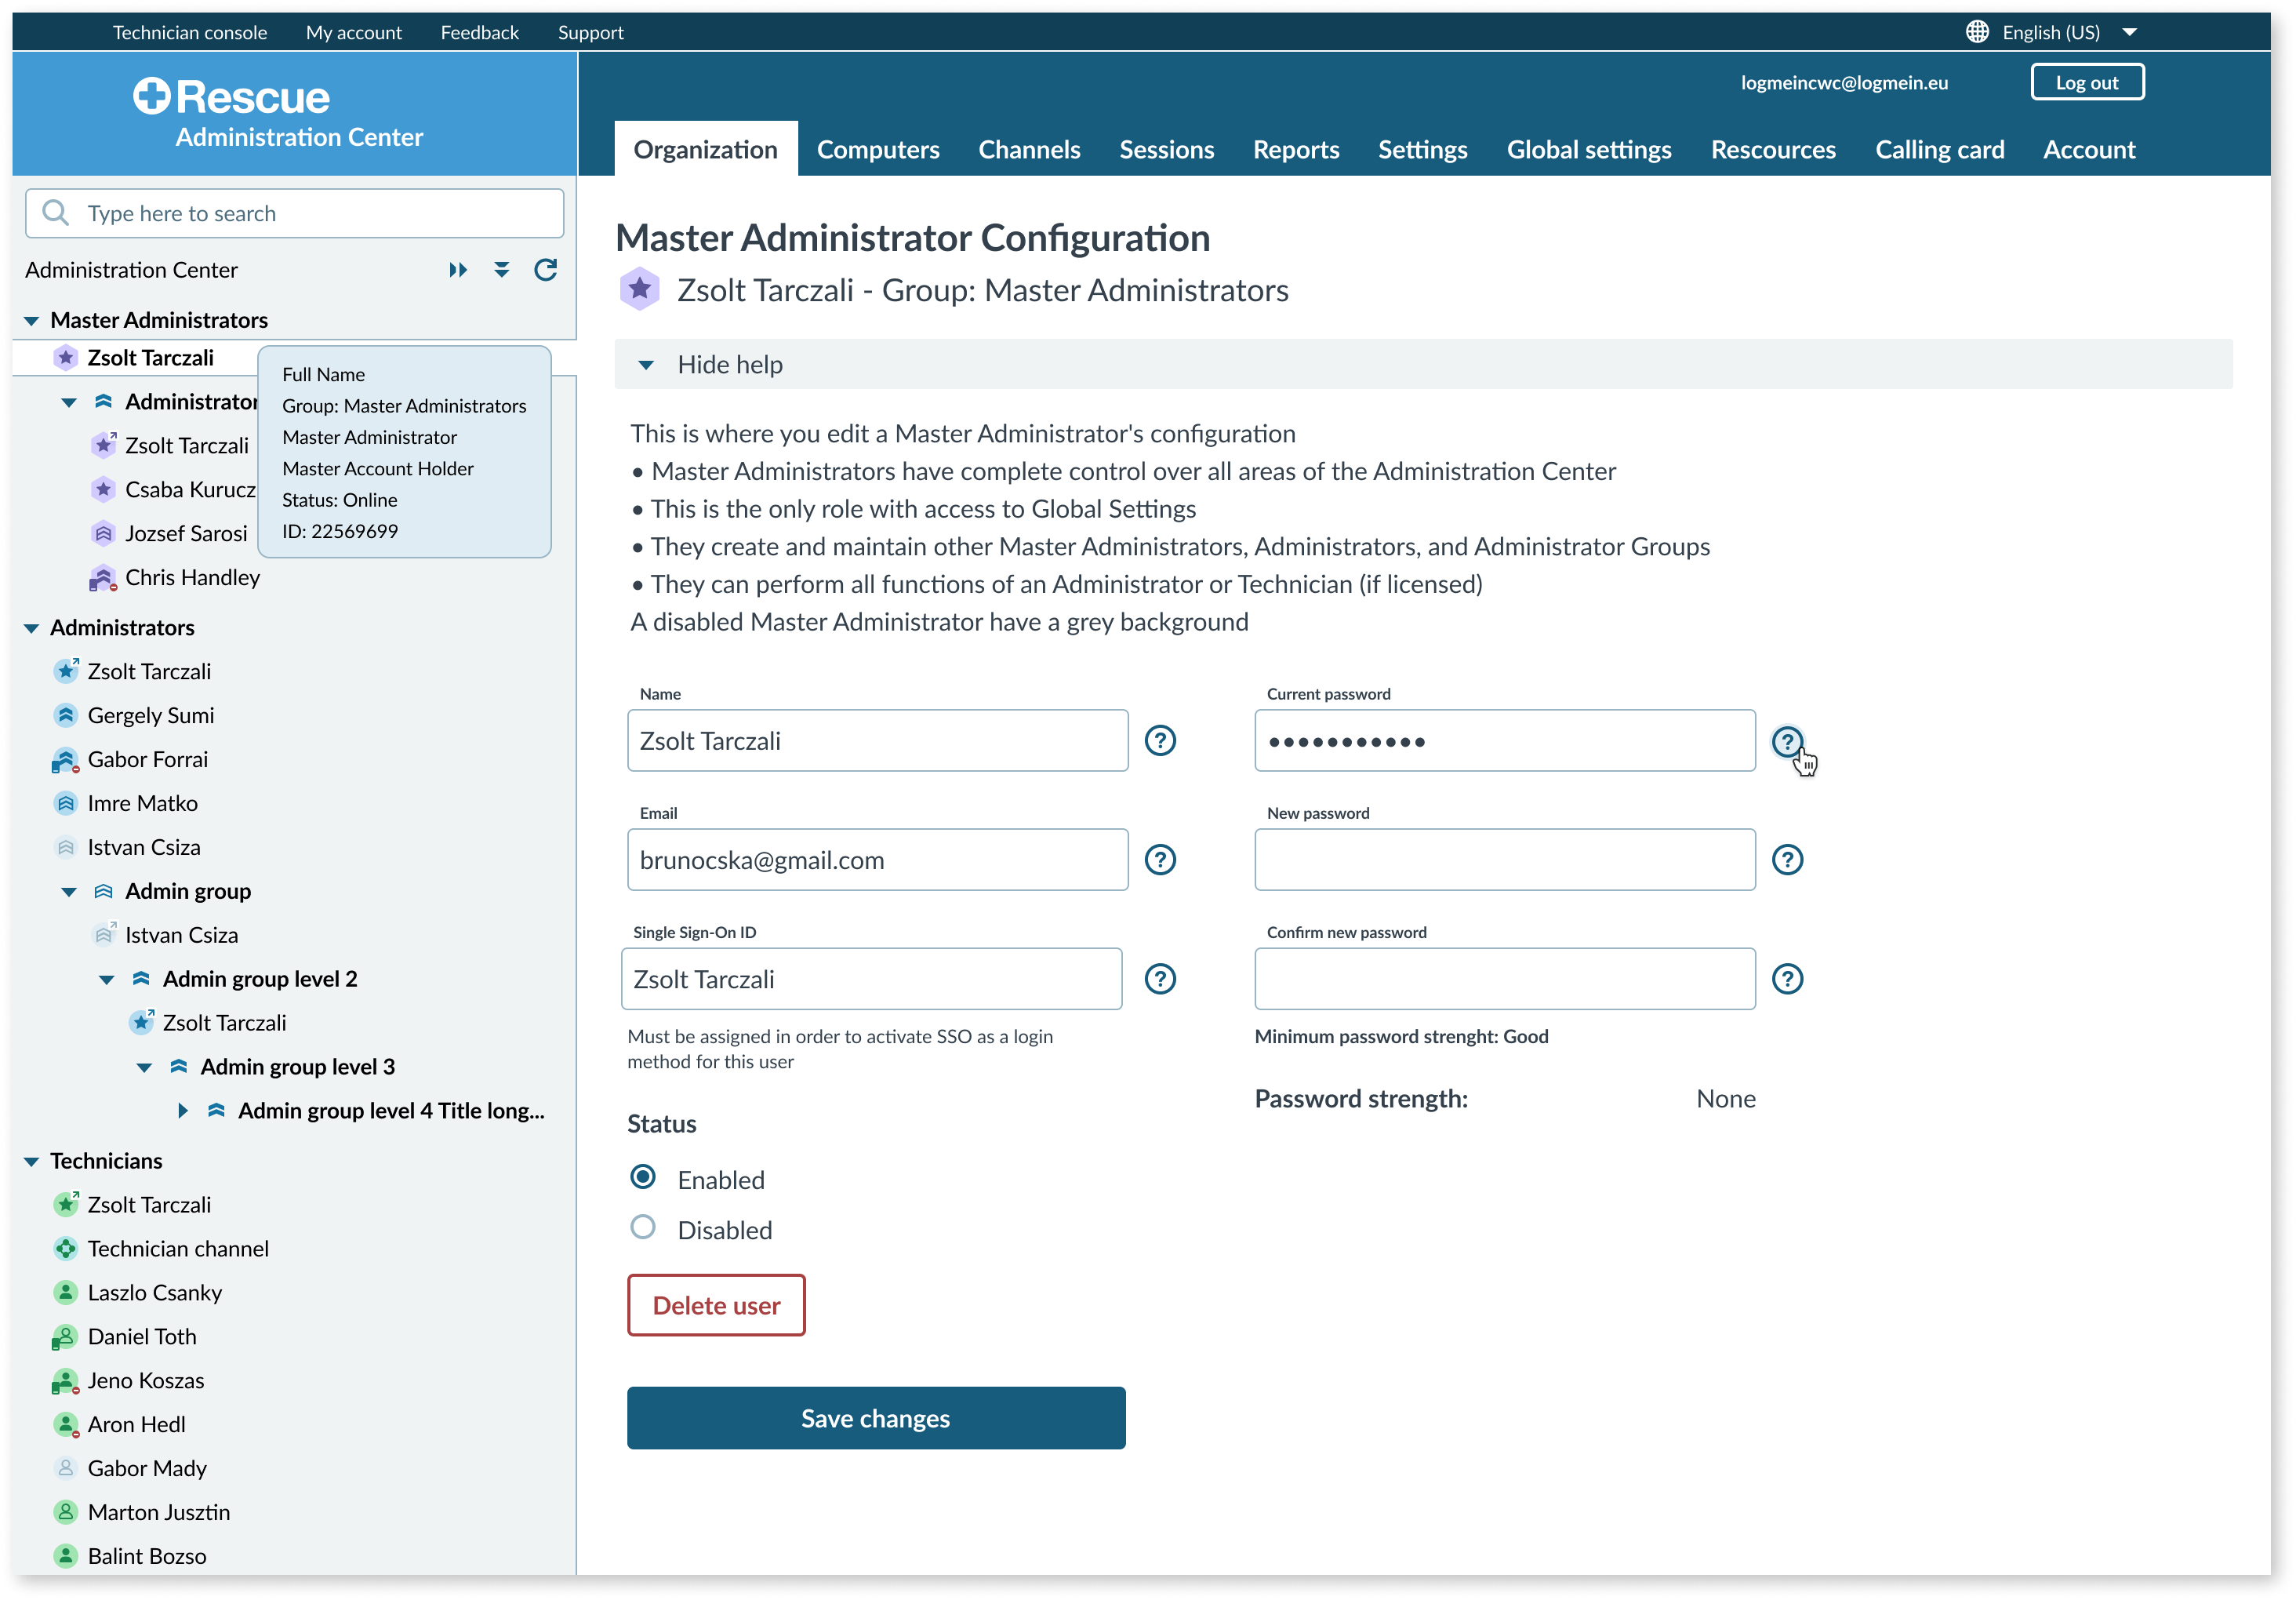 UI showing Master Administrator Configuration settings in the admin center.